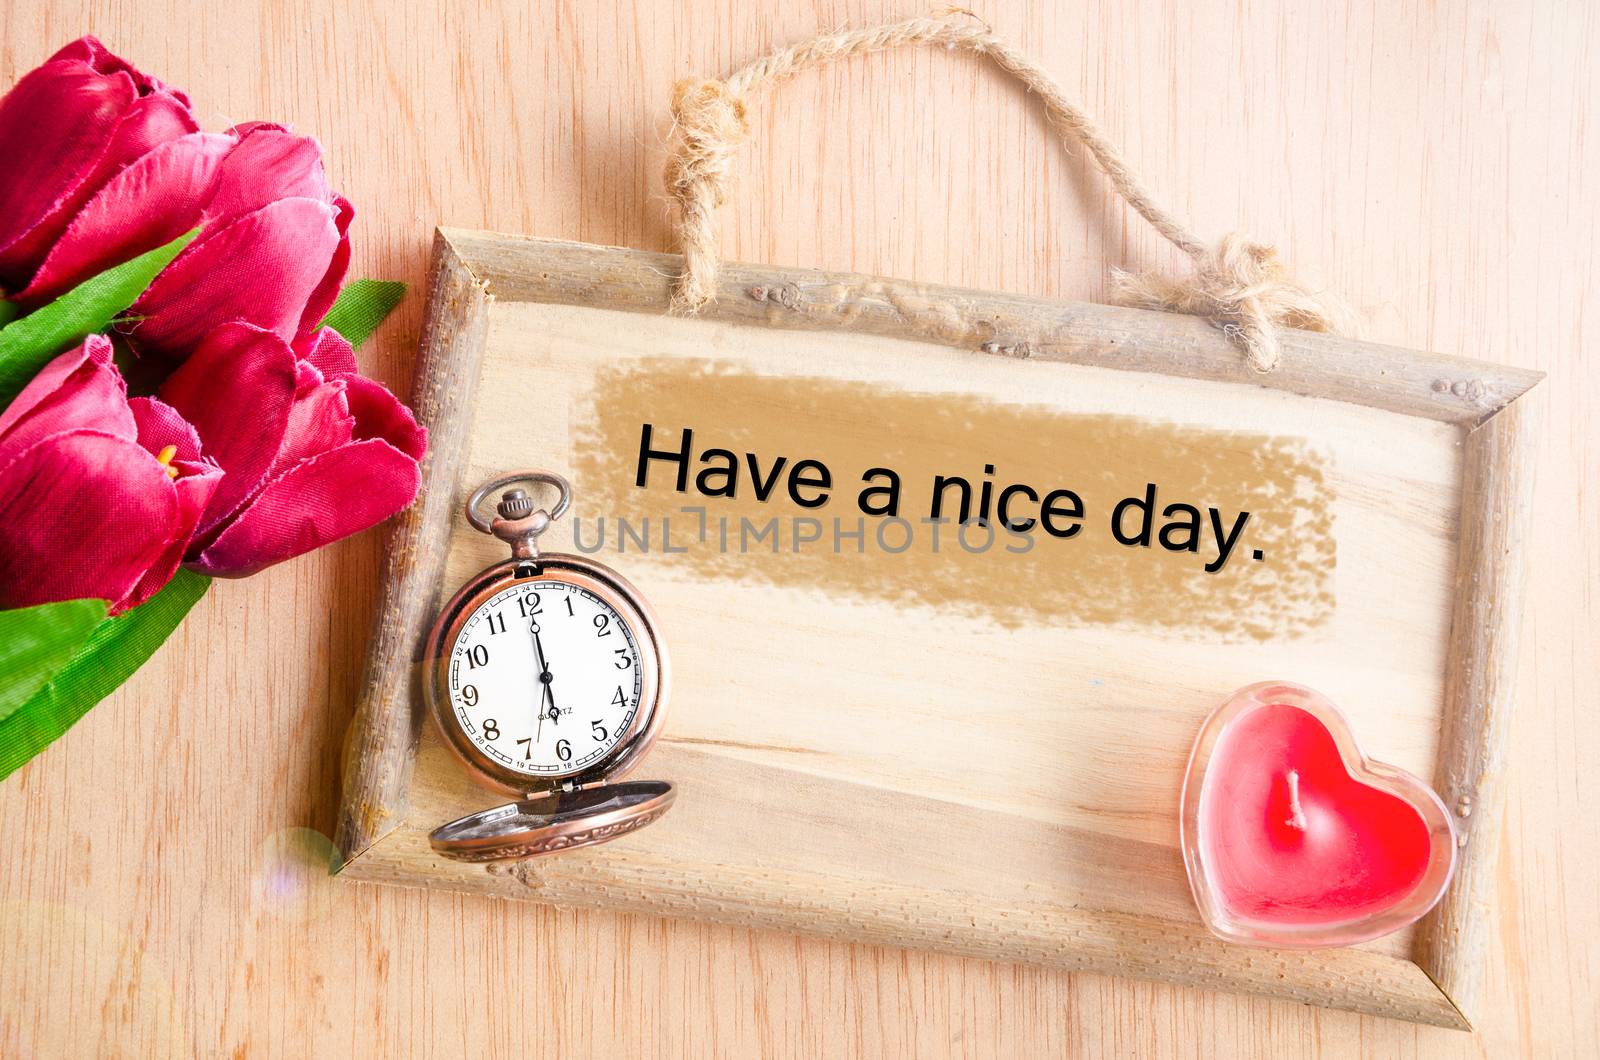 Have a nice day. by Gamjai